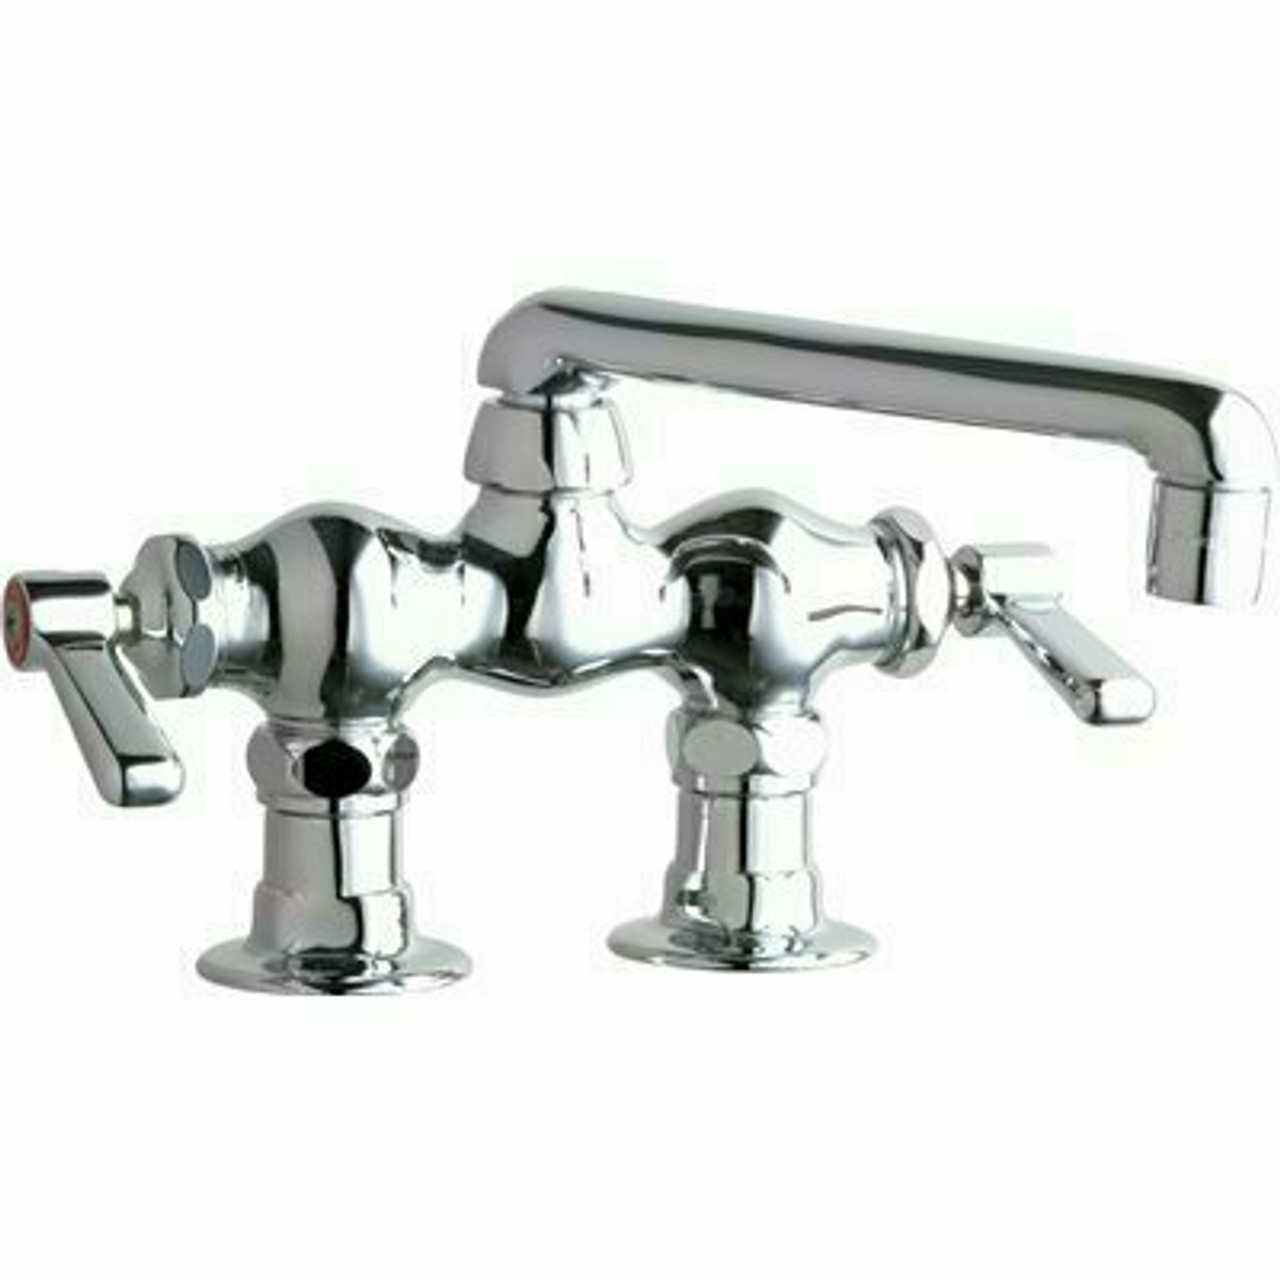 Chicago Faucets 2-Handle Exposed Sink Faucet In Chrome